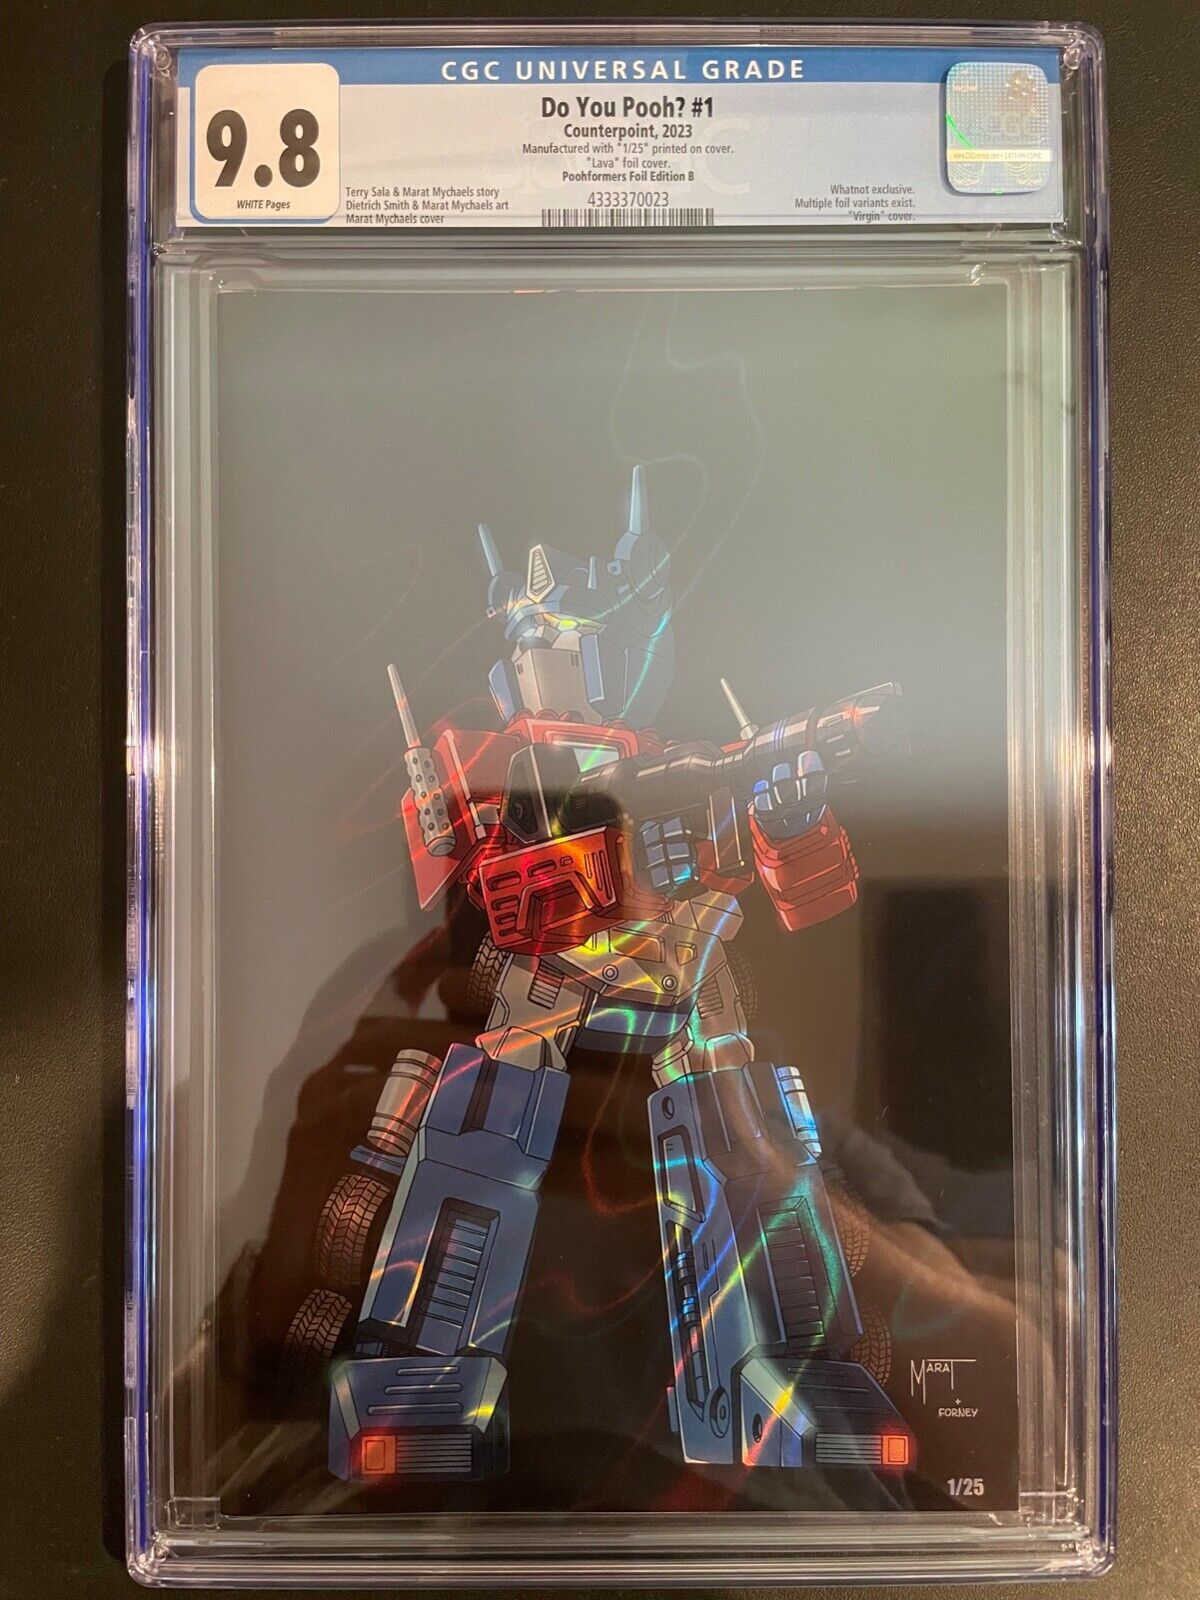 TRANSFORMERS Homage by Marat CGC 9.8 *POOHFORMERS VIRGIN LAVA FOIL VARIANT* 1/25